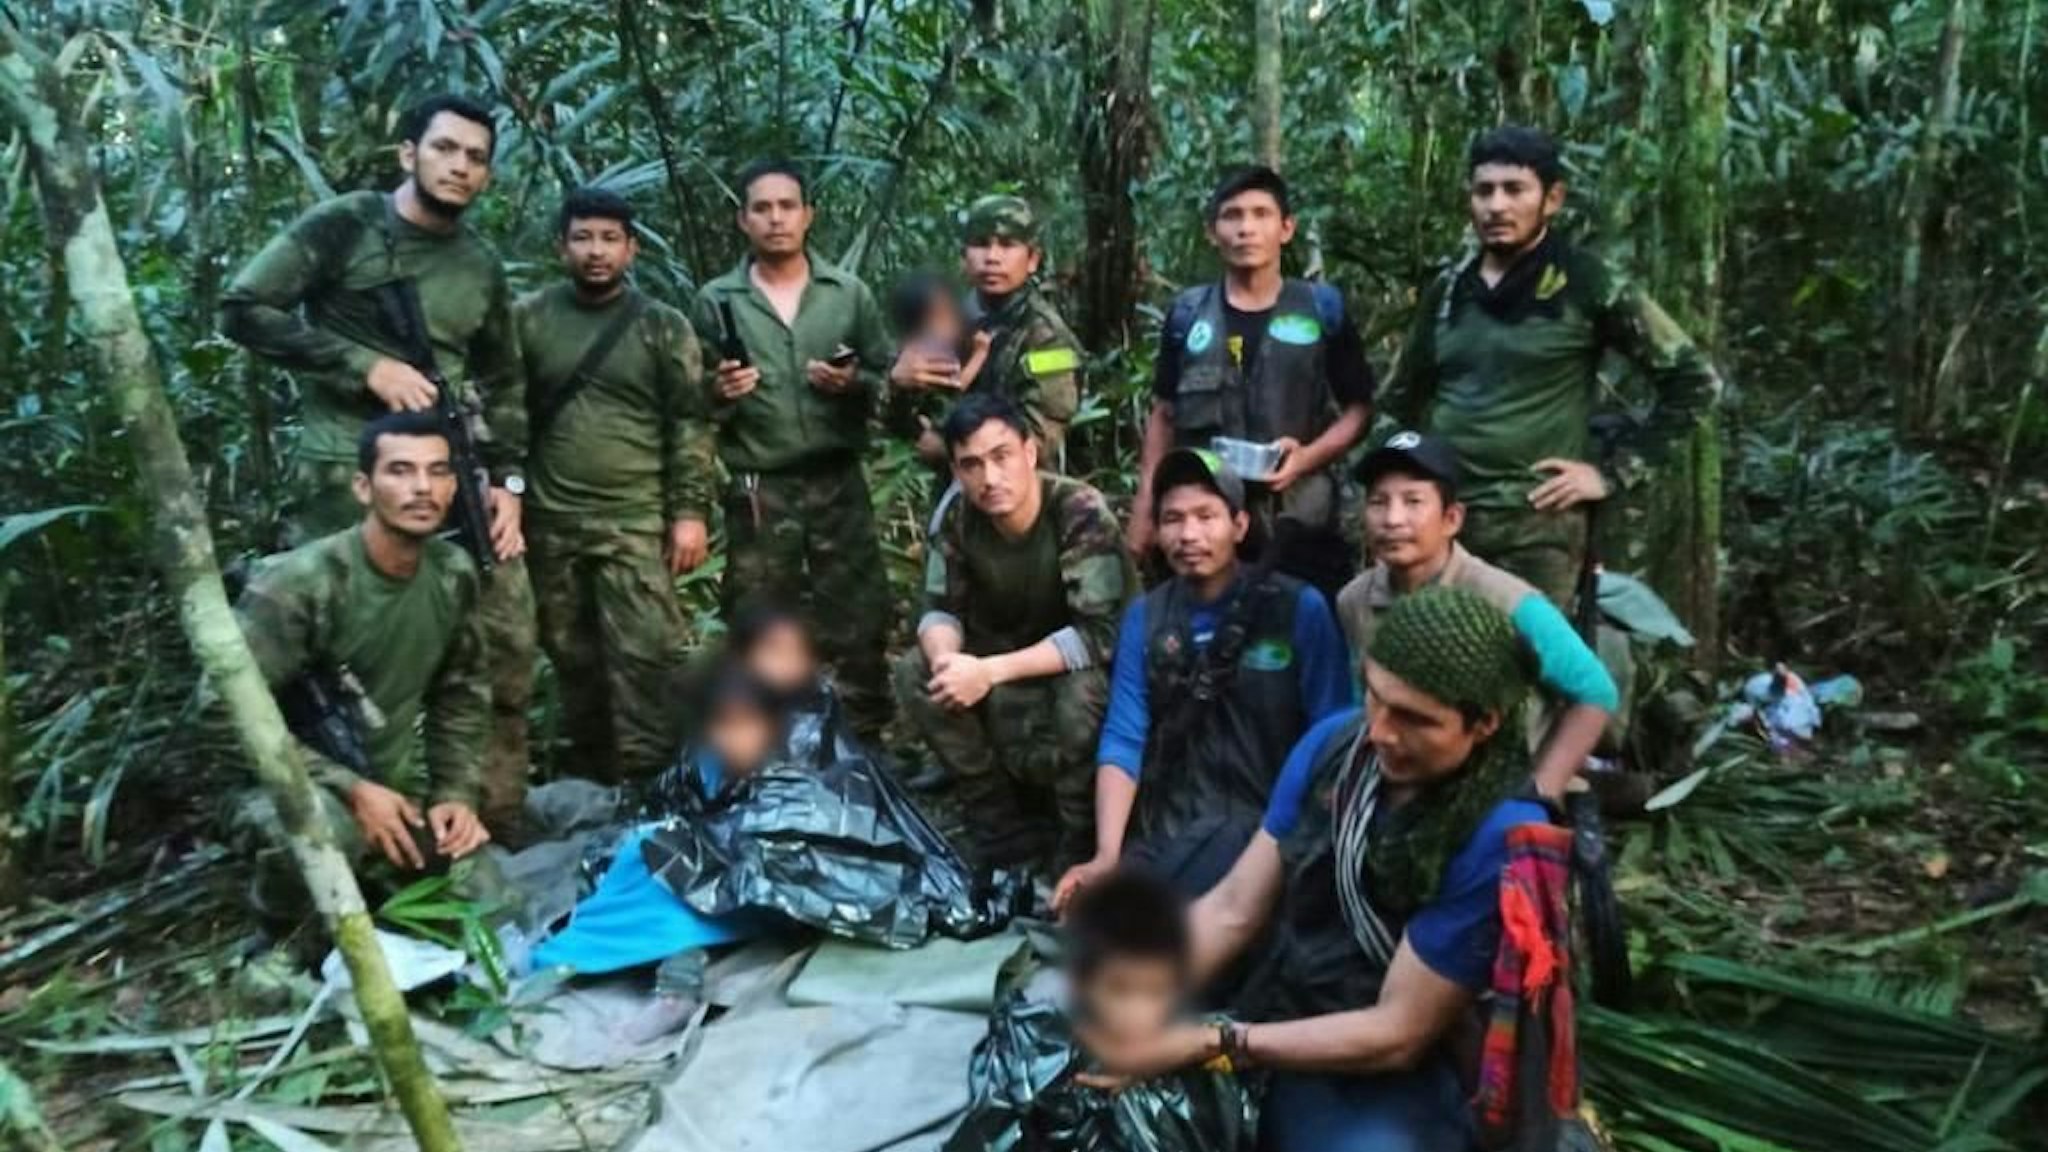 JUNGLE, COLOMBIA - JUNE 9: (EDITOR'S NOTE: This image has been altered â" child's face has been blurred) (----EDITORIAL USE ONLY - MANDATORY CREDIT - 'COLOMBIAN MILITARY FORCES / HANDOUT' - NO MARKETING NO ADVERTISING CAMPAIGNS - DISTRIBUTED AS A SERVICE TO CLIENTS----) Colombian Military Forces pose for a photo as they found four children who survived 40 days in the Amazon jungle after their plane crashed, in the department of Caqueta on June 9, 2023. A miracle in the jungle is how Colombians are describing the discovery Friday of four indigenous children who survived 40 days in the Amazon jungle after their plane crashed. The children were flying May 1 from Araracuara, in Amazonas province, to San Jose del Guaviare, in southeastern Colombia when the plane malfunctioned and crashed. Three adults, including the children's mother, died.